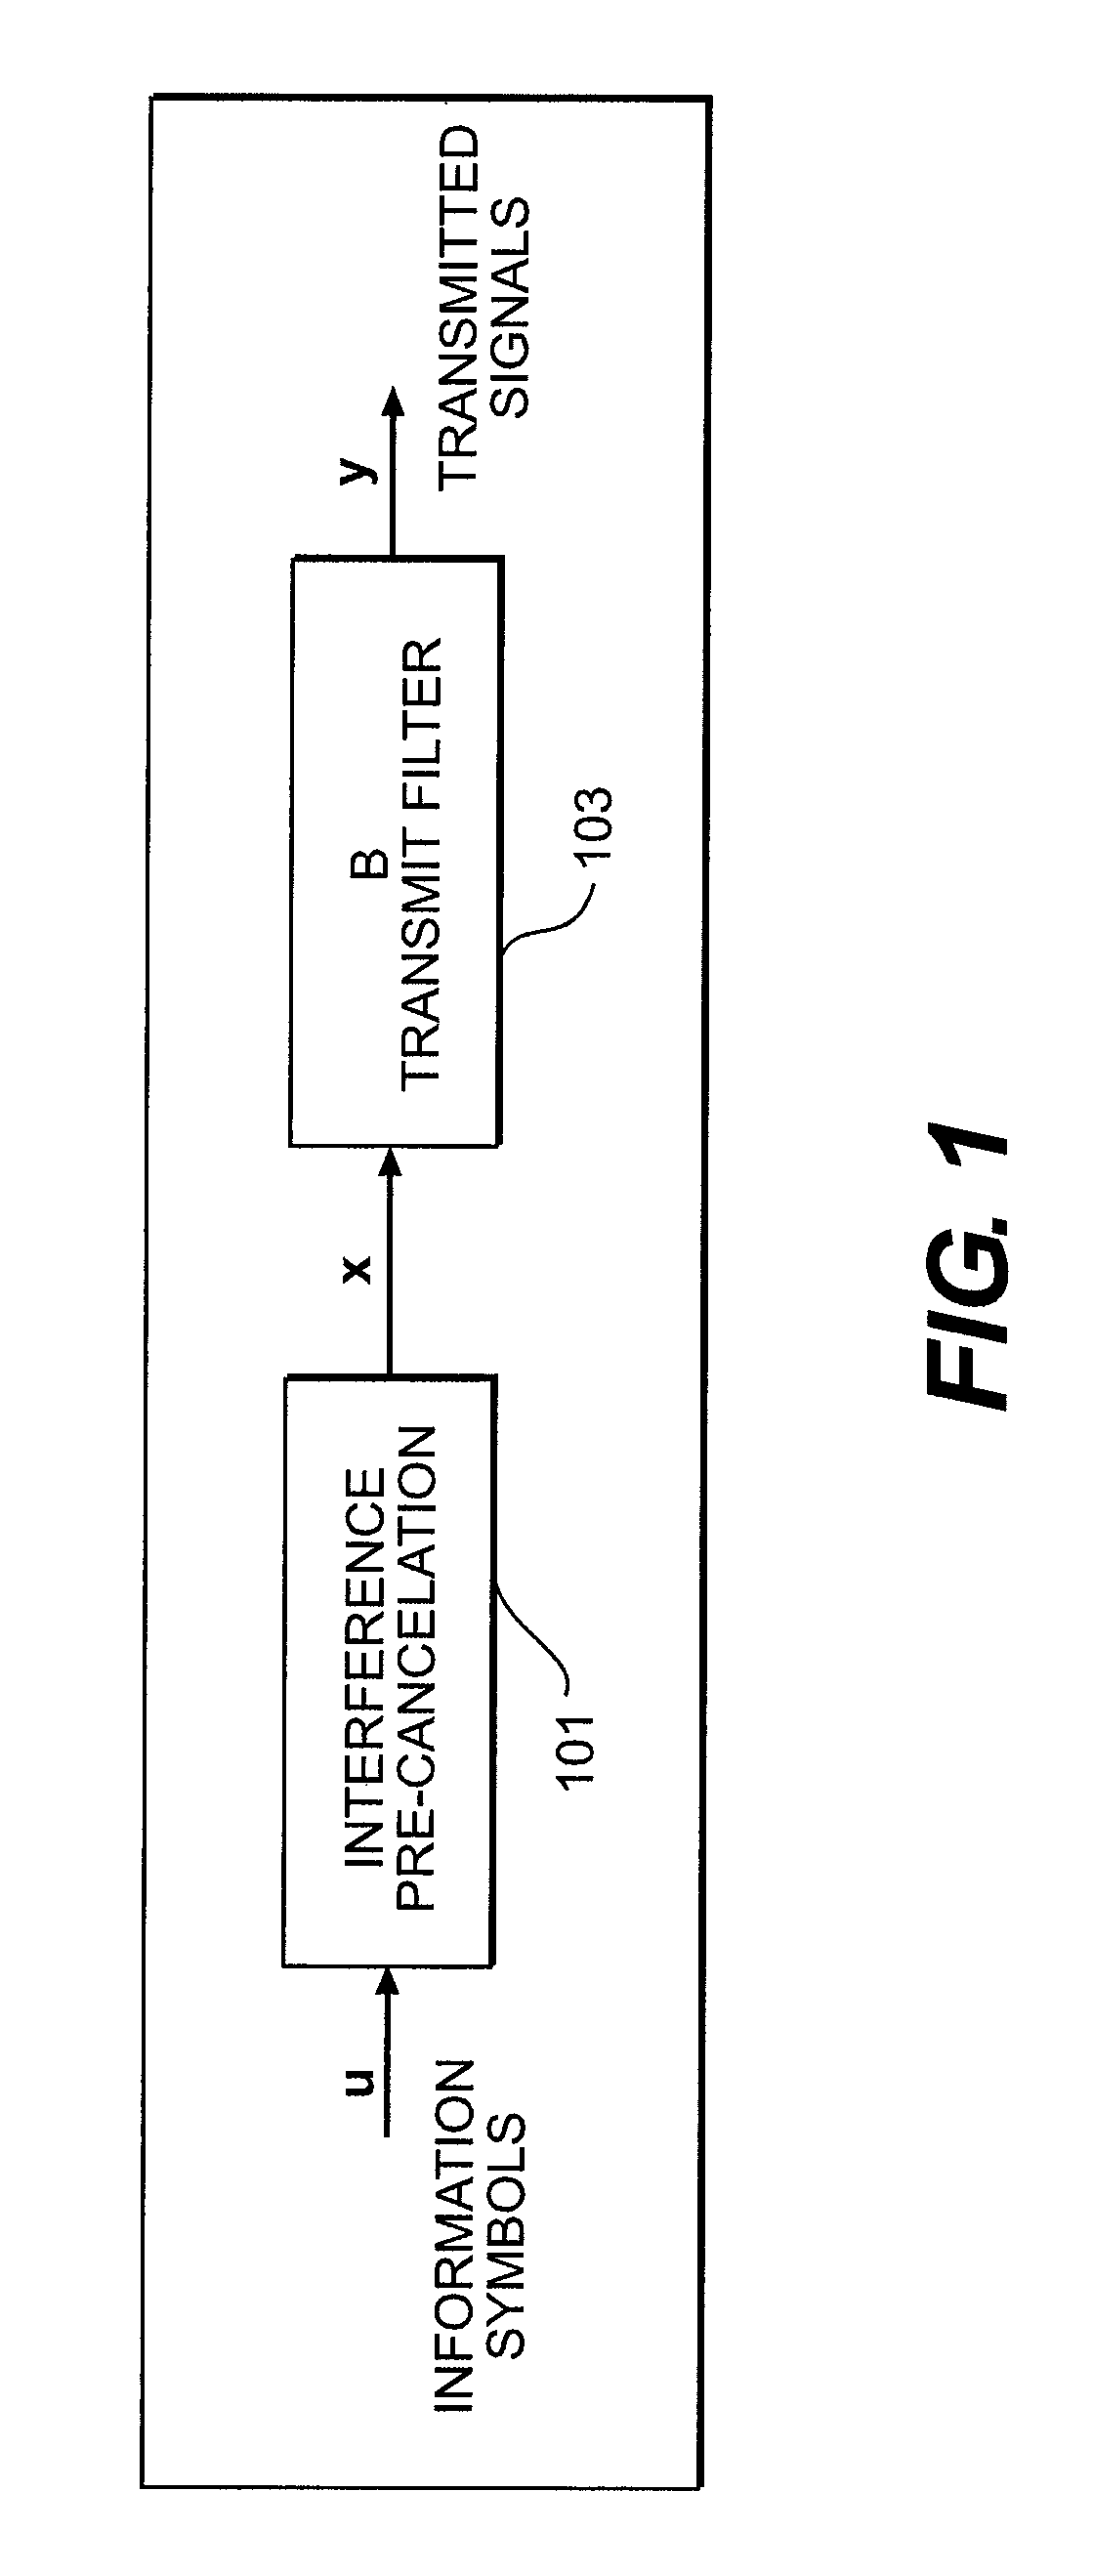 Generalized decision feedback equalizer precoder with input covariance matrix calculation for multi-user multiple-input multiple-output wireless transmission systems